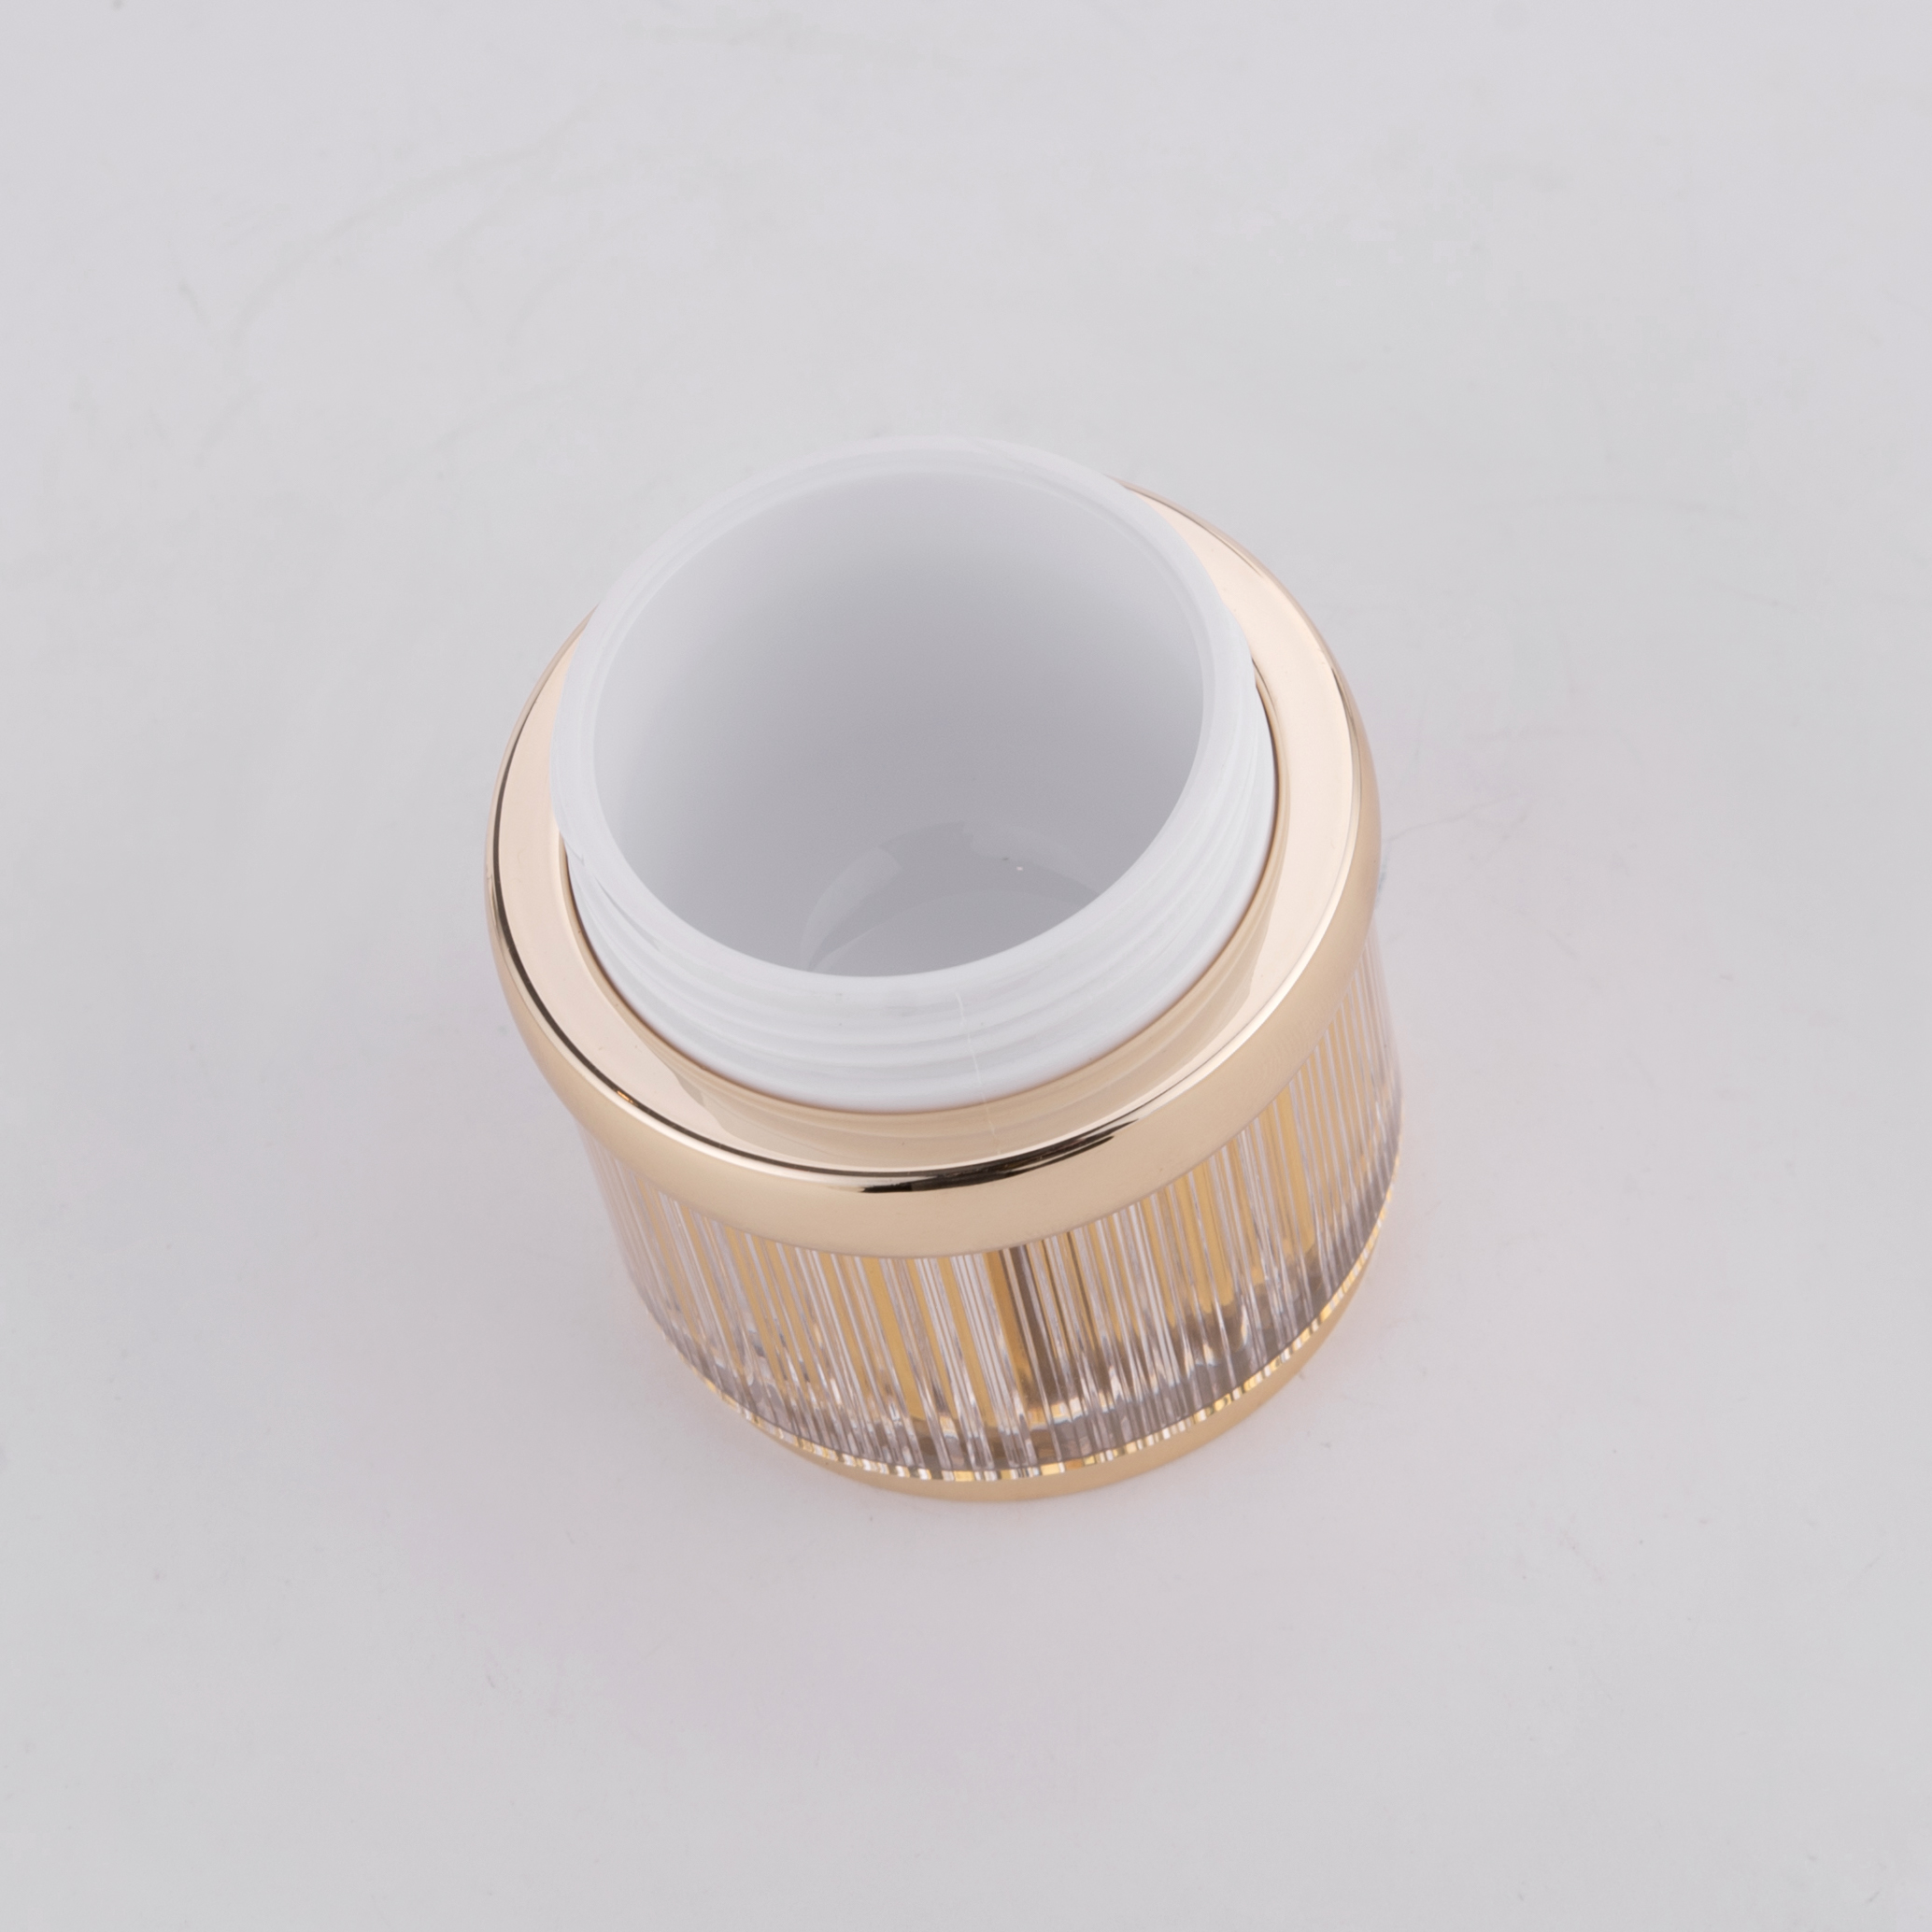 15g 30g 50g Gold Color Round Luxury Cosmetic Cream Containers 